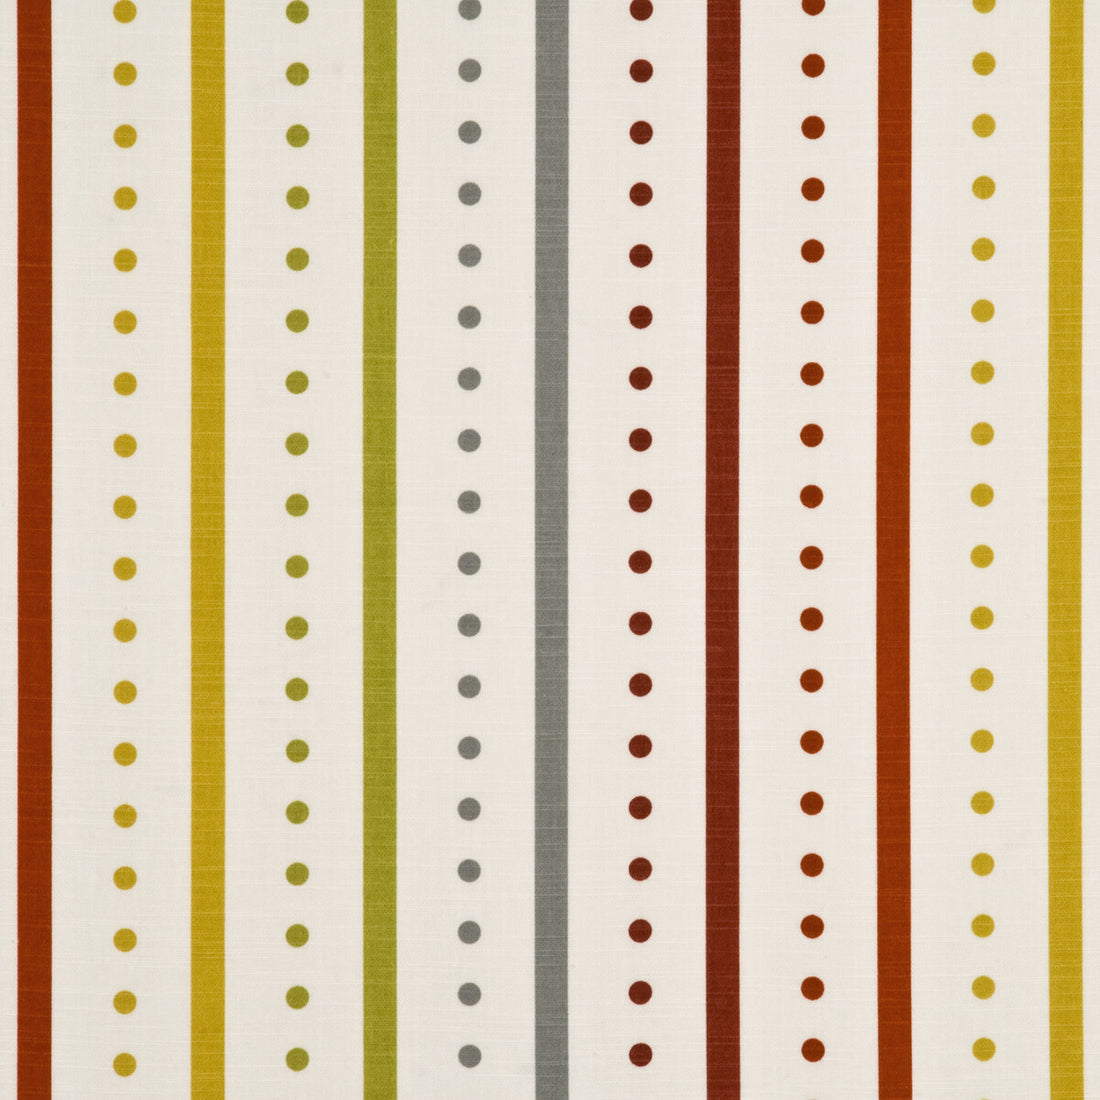 Opera Stripe fabric in red/gold color - pattern PP50344.5.0 - by Baker Lifestyle in the Opera Garden collection